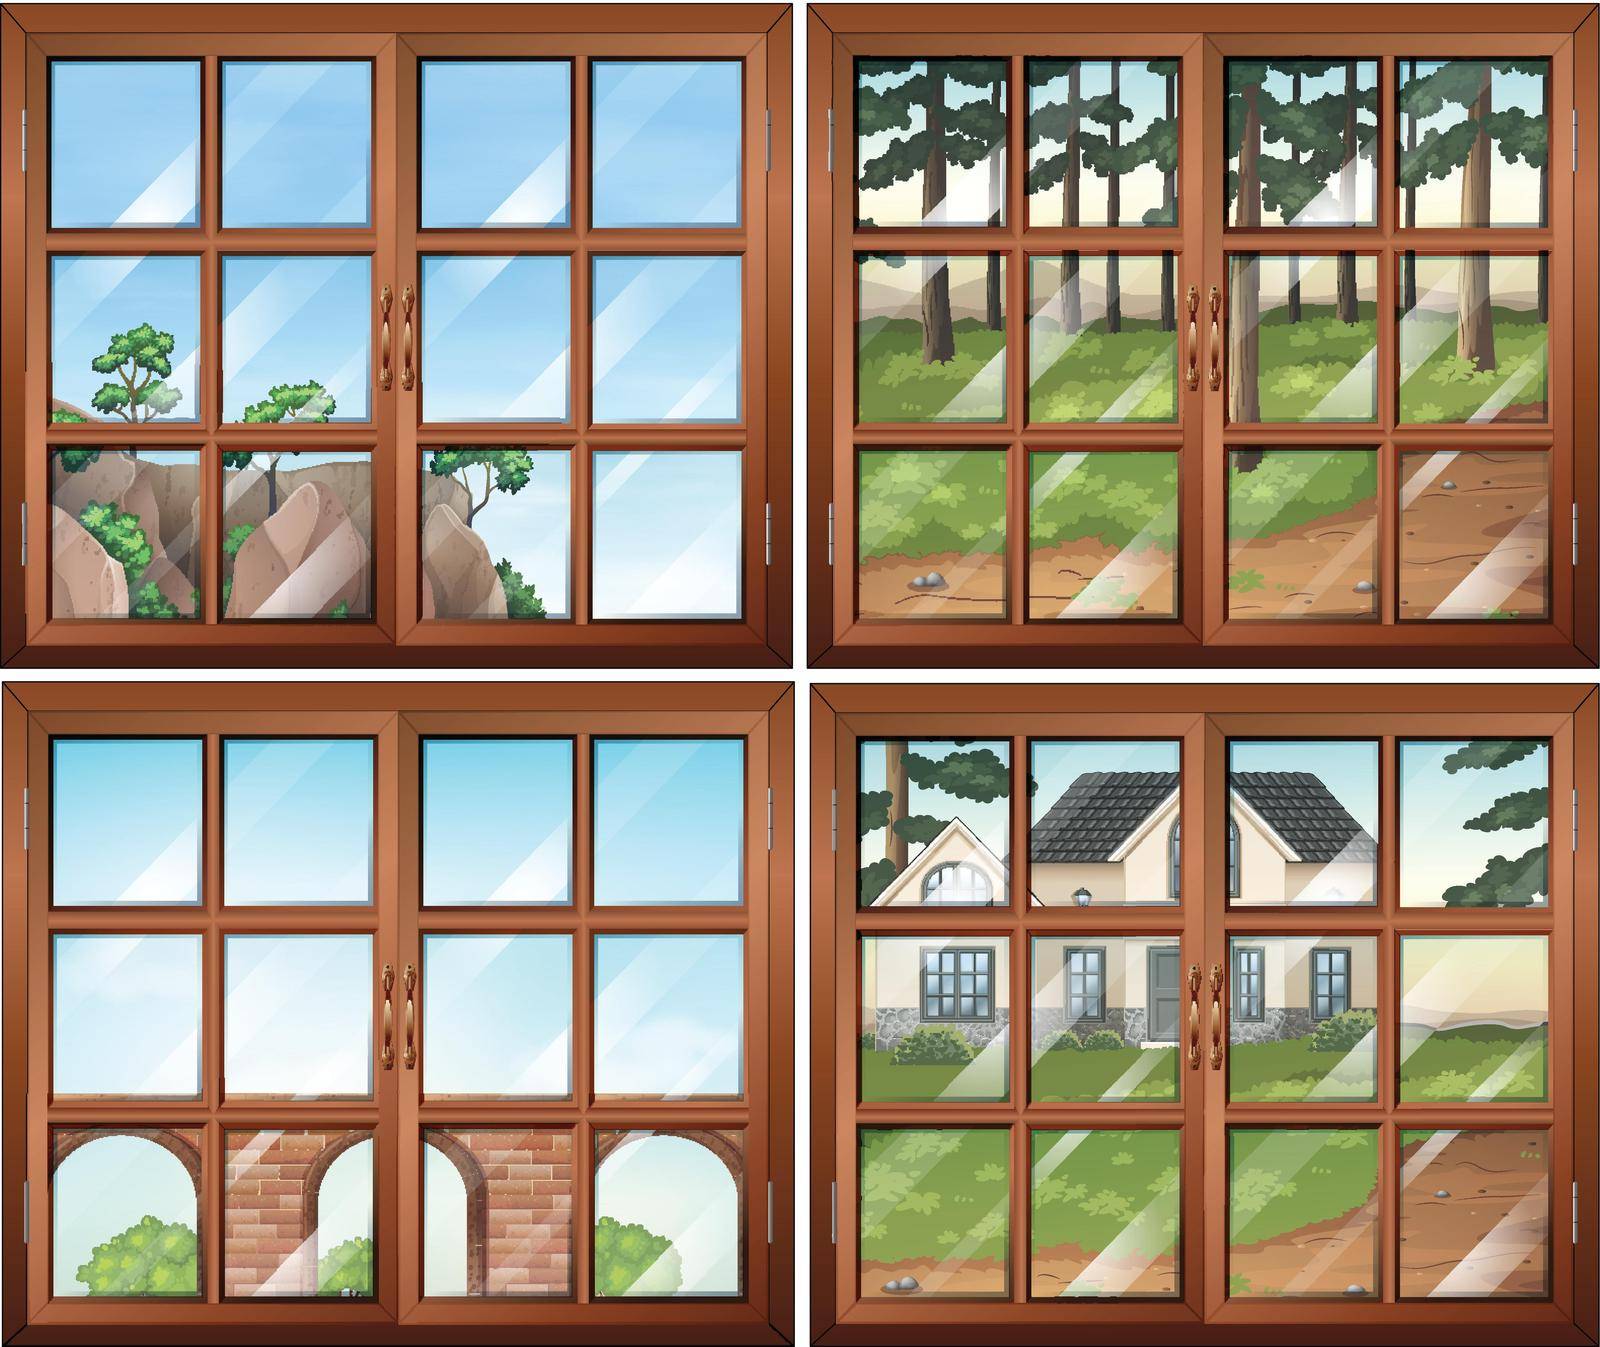 Four scene from windows by iimages